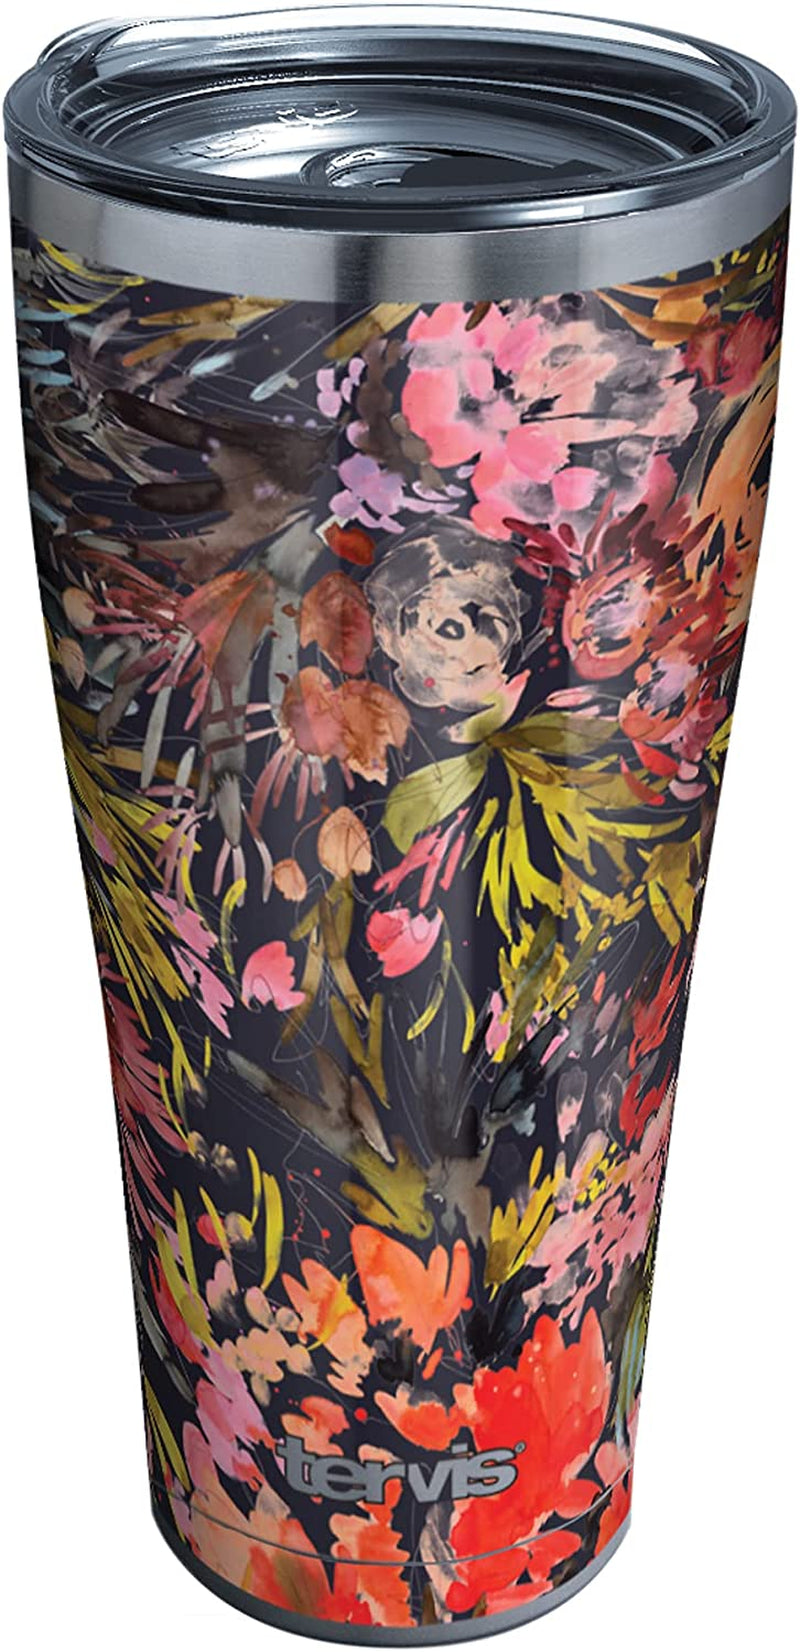 Tervis Made in USA Double Walled Kelly Ventura Floral Collection Insulated Tumbler Cup Keeps Drinks Cold & Hot, 16Oz 4Pk - Classic, Assorted Home & Garden > Kitchen & Dining > Tableware > Drinkware Tervis Bright Floral 30oz - Stainless Steel 